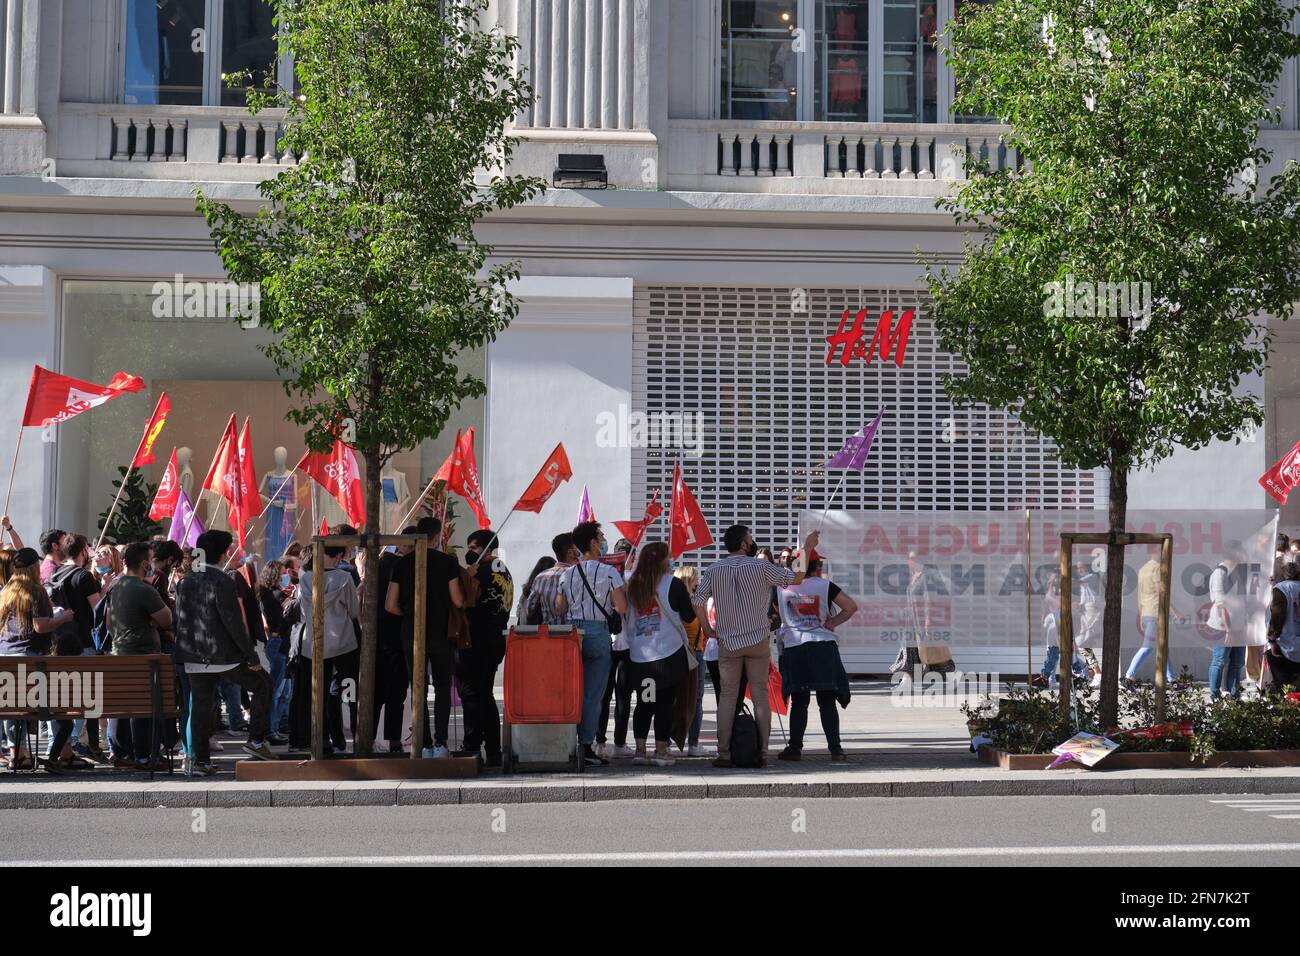 Madrid, Spain. May 14, 2021: Group of people protesting with CCOO, UGT and Juventud comunista flag in front of a H&M shop because of an ERE for 1100 w Stock Photo